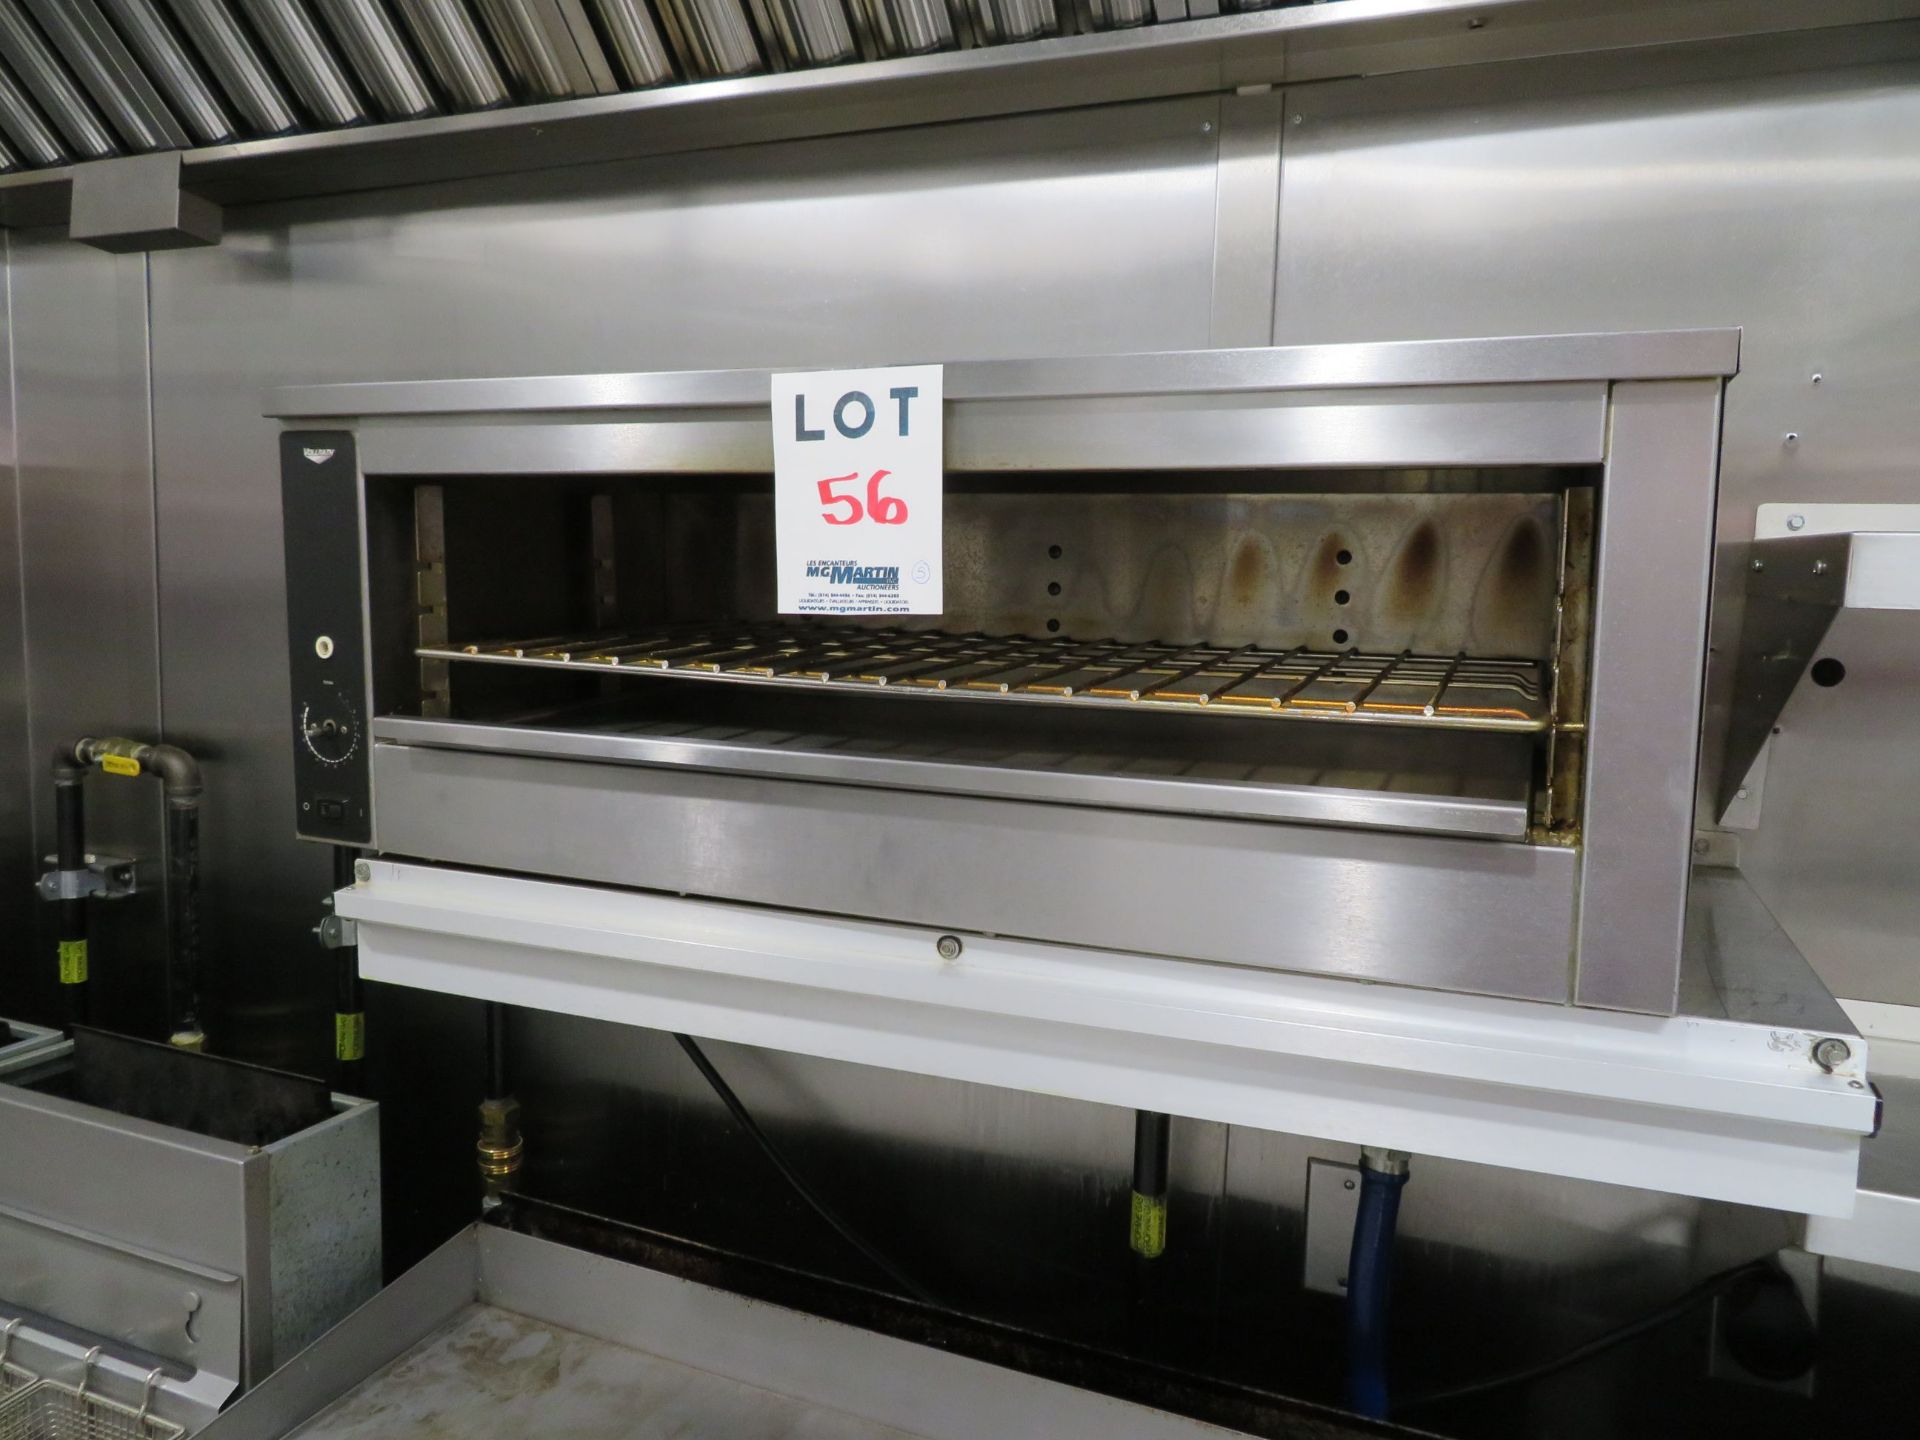 VOLLRATH stainless steel electric broiling oven, cheese melter, Mod: JW30 approx. 35" x14" x 13"